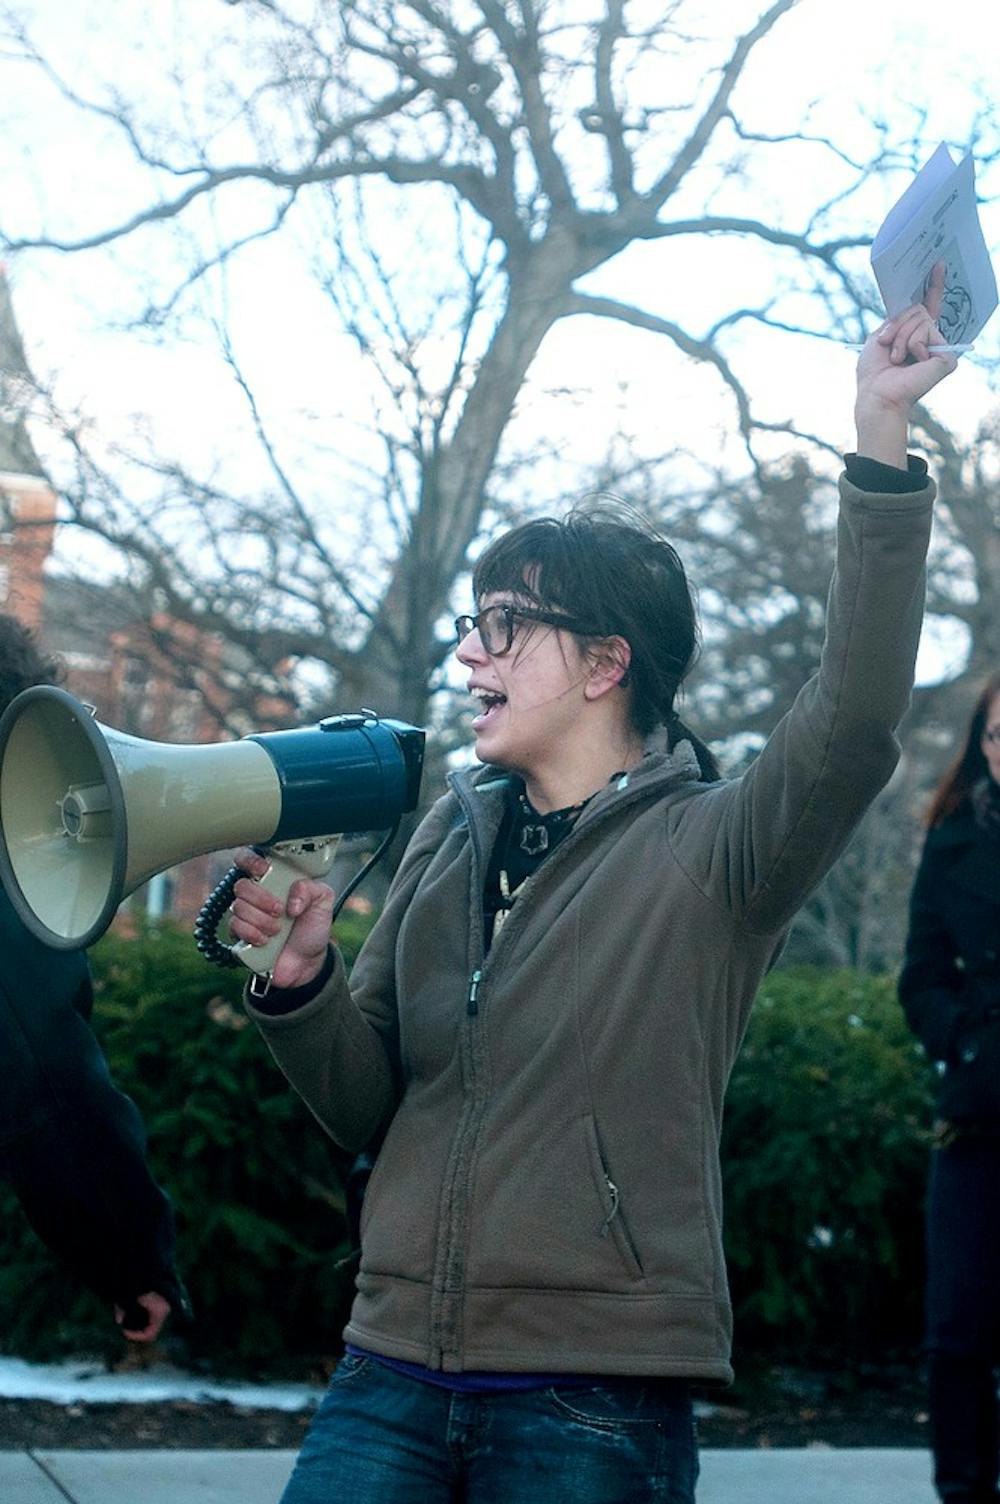 <p>MSU alumna Rachel Berzack yells into a megaphone on April 15, 2014, at Beaumont Tower before marching to the state Capitol as part of "Take Back the Night." The event focuses on eliminating sexual violence. Betsy Agosta/The State News</p>